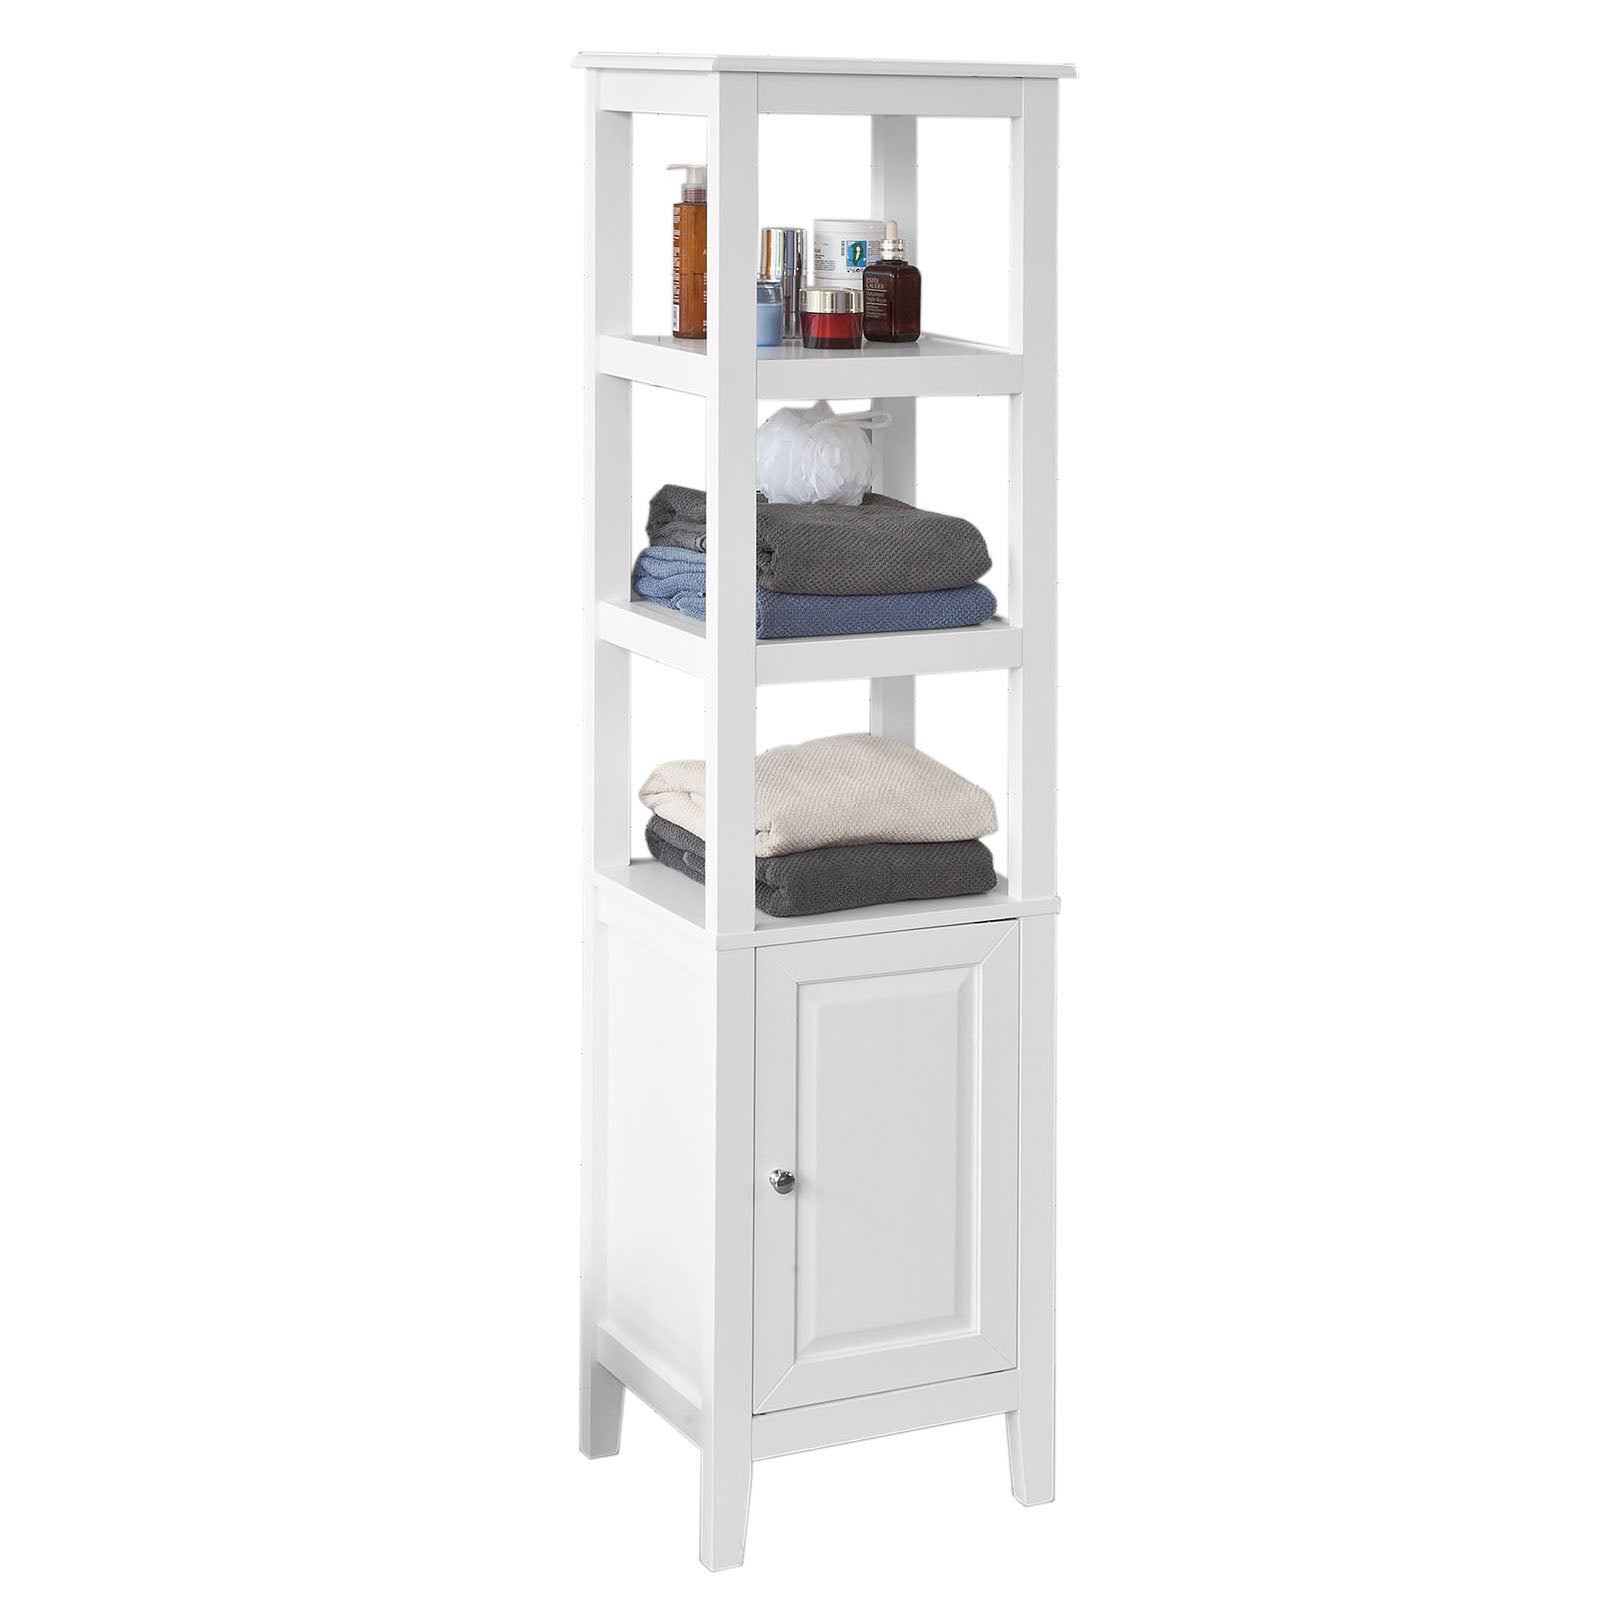 Haotian Bzr17-W, Floor Standing Tall Bathroom Storage Cabinet With